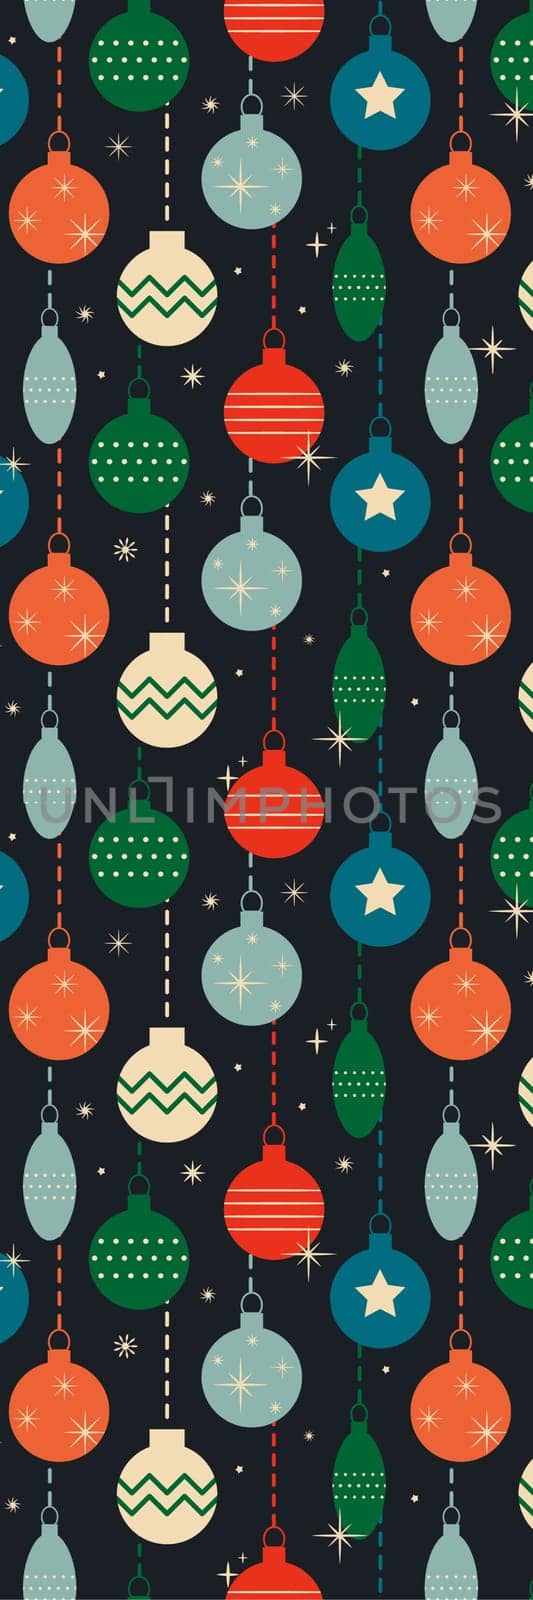 bookmark with retro Christmas pattern with Christmas tree decorations